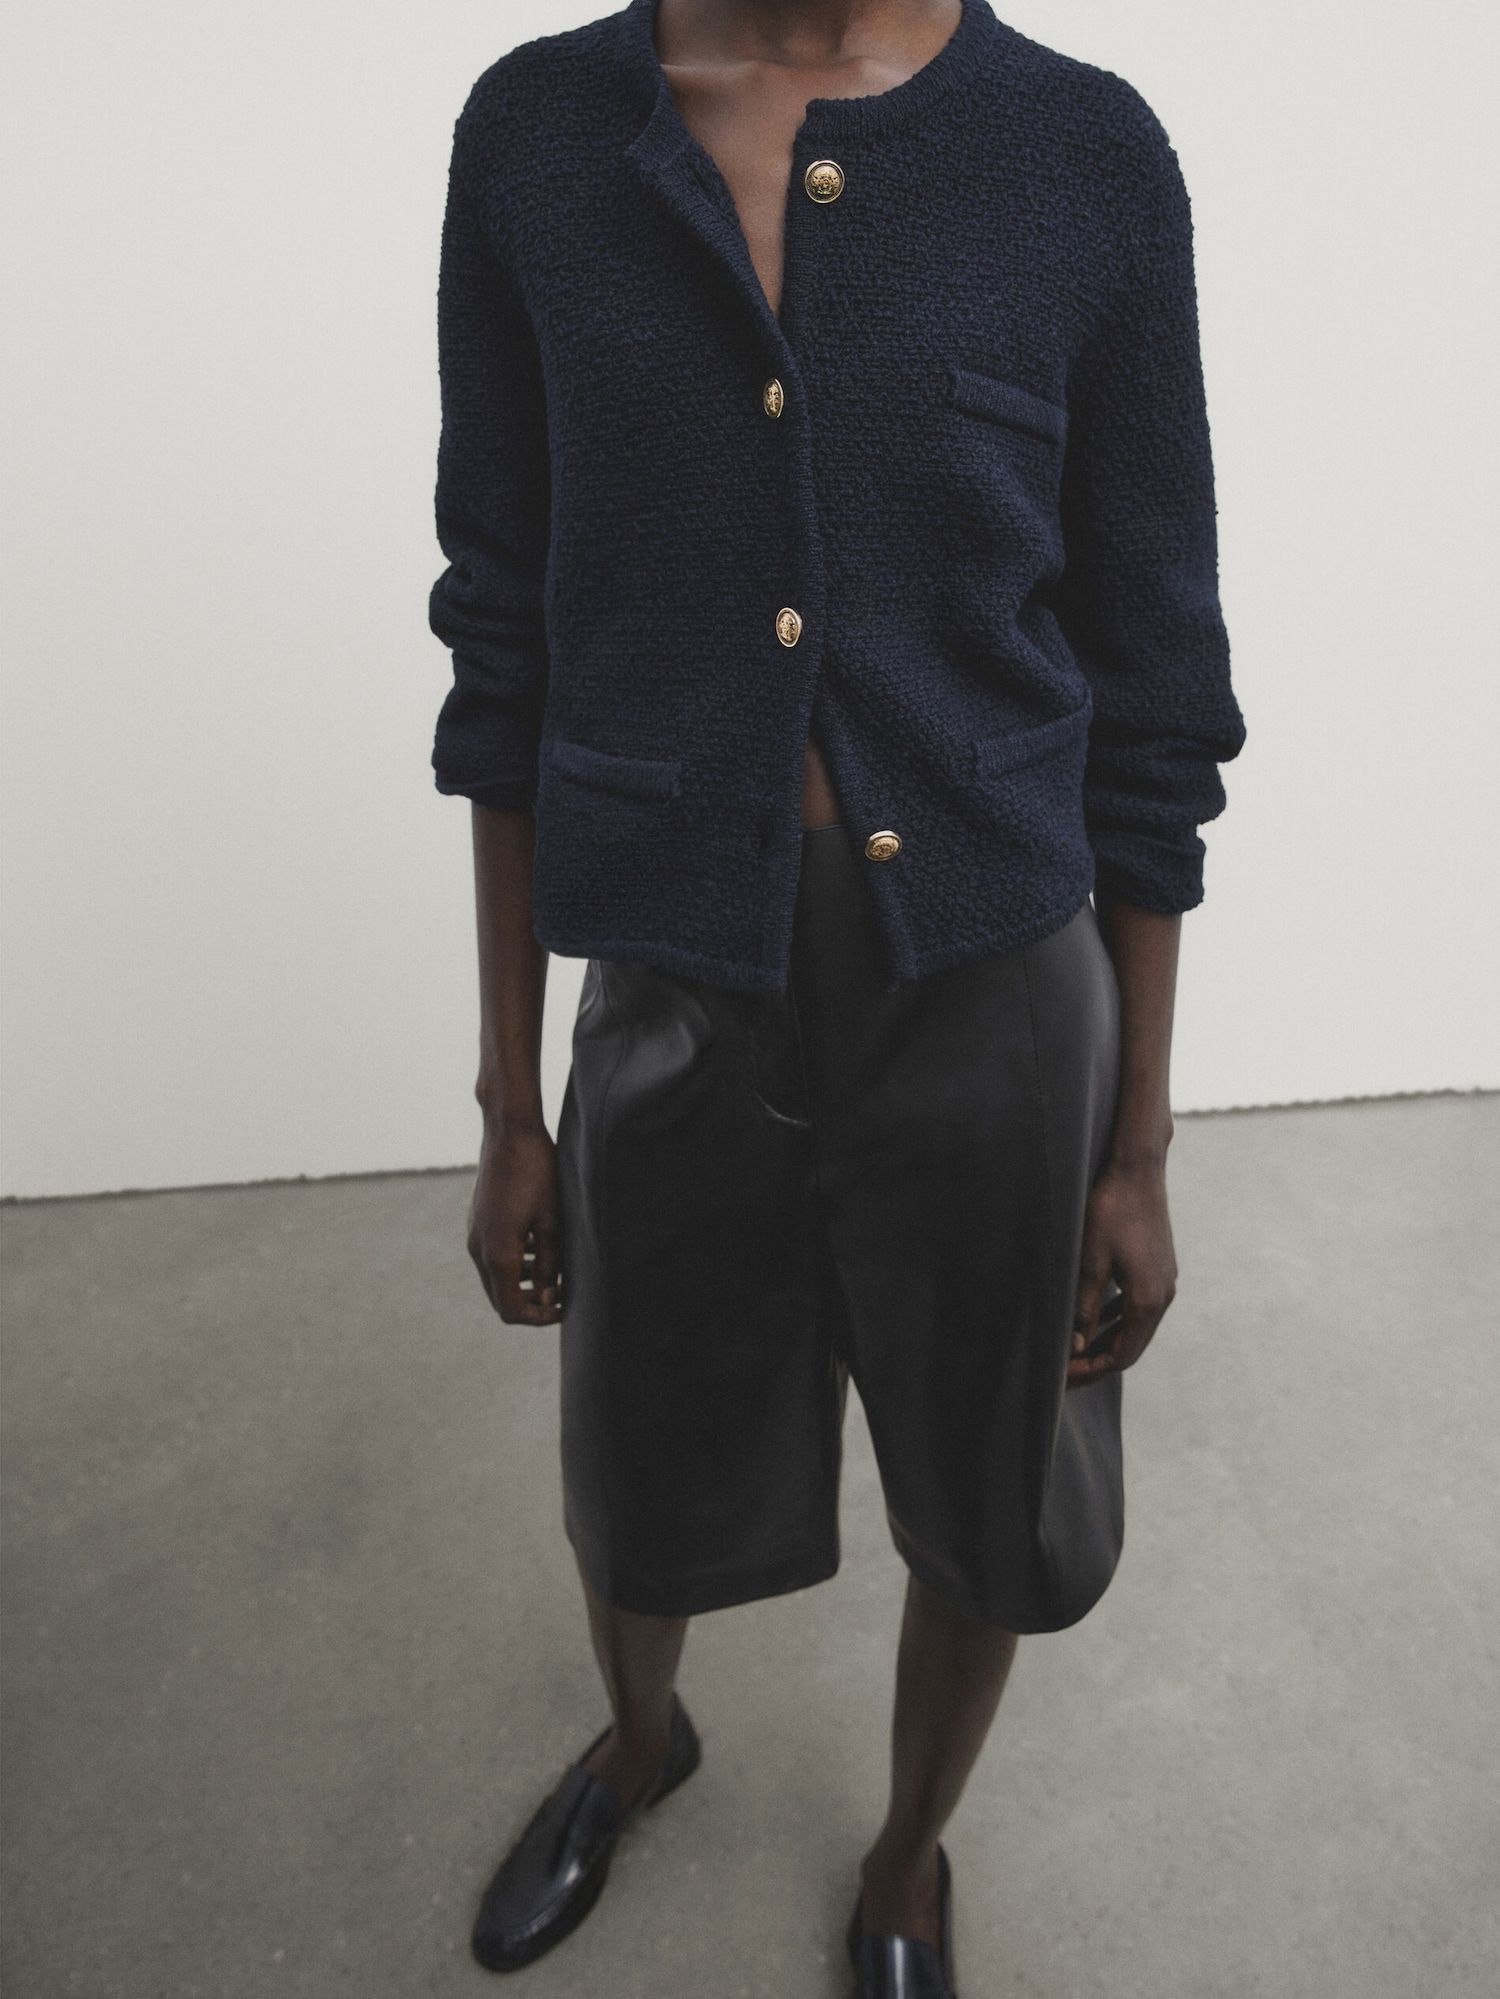 Textured knit cardigan with pockets | Massimo Dutti (US)